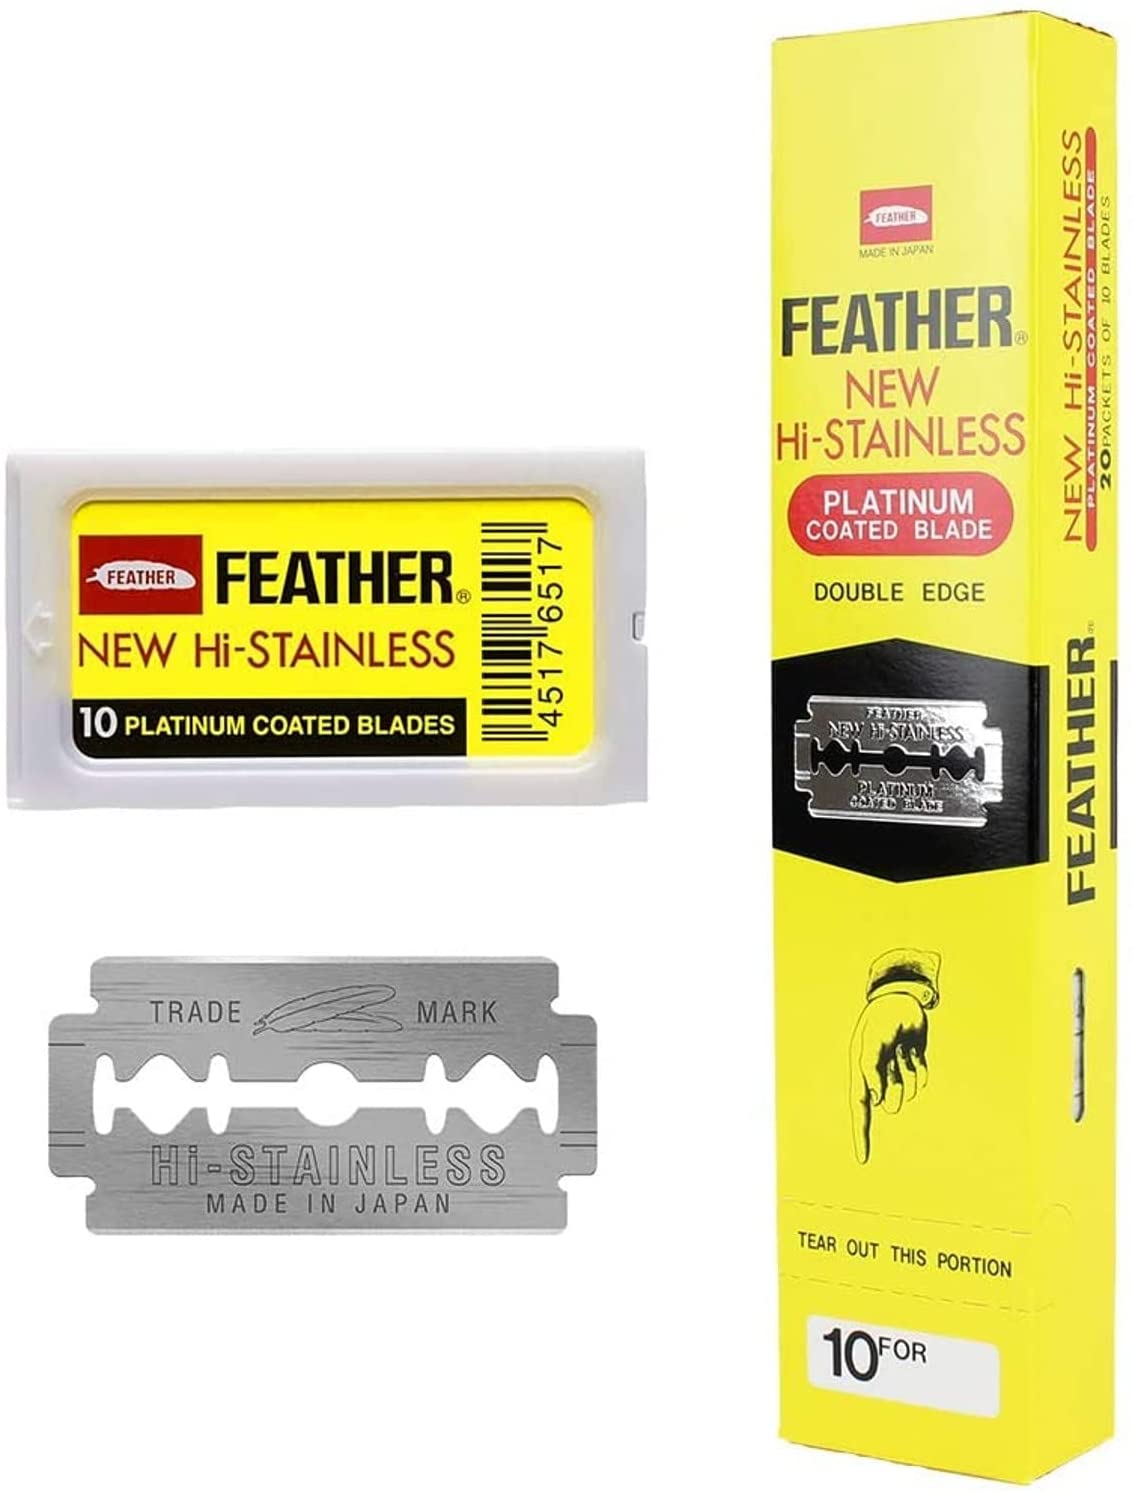 FEATHER DOUBLE EDGE RAZOR BLADE - 10 BLADE PACK OF 20